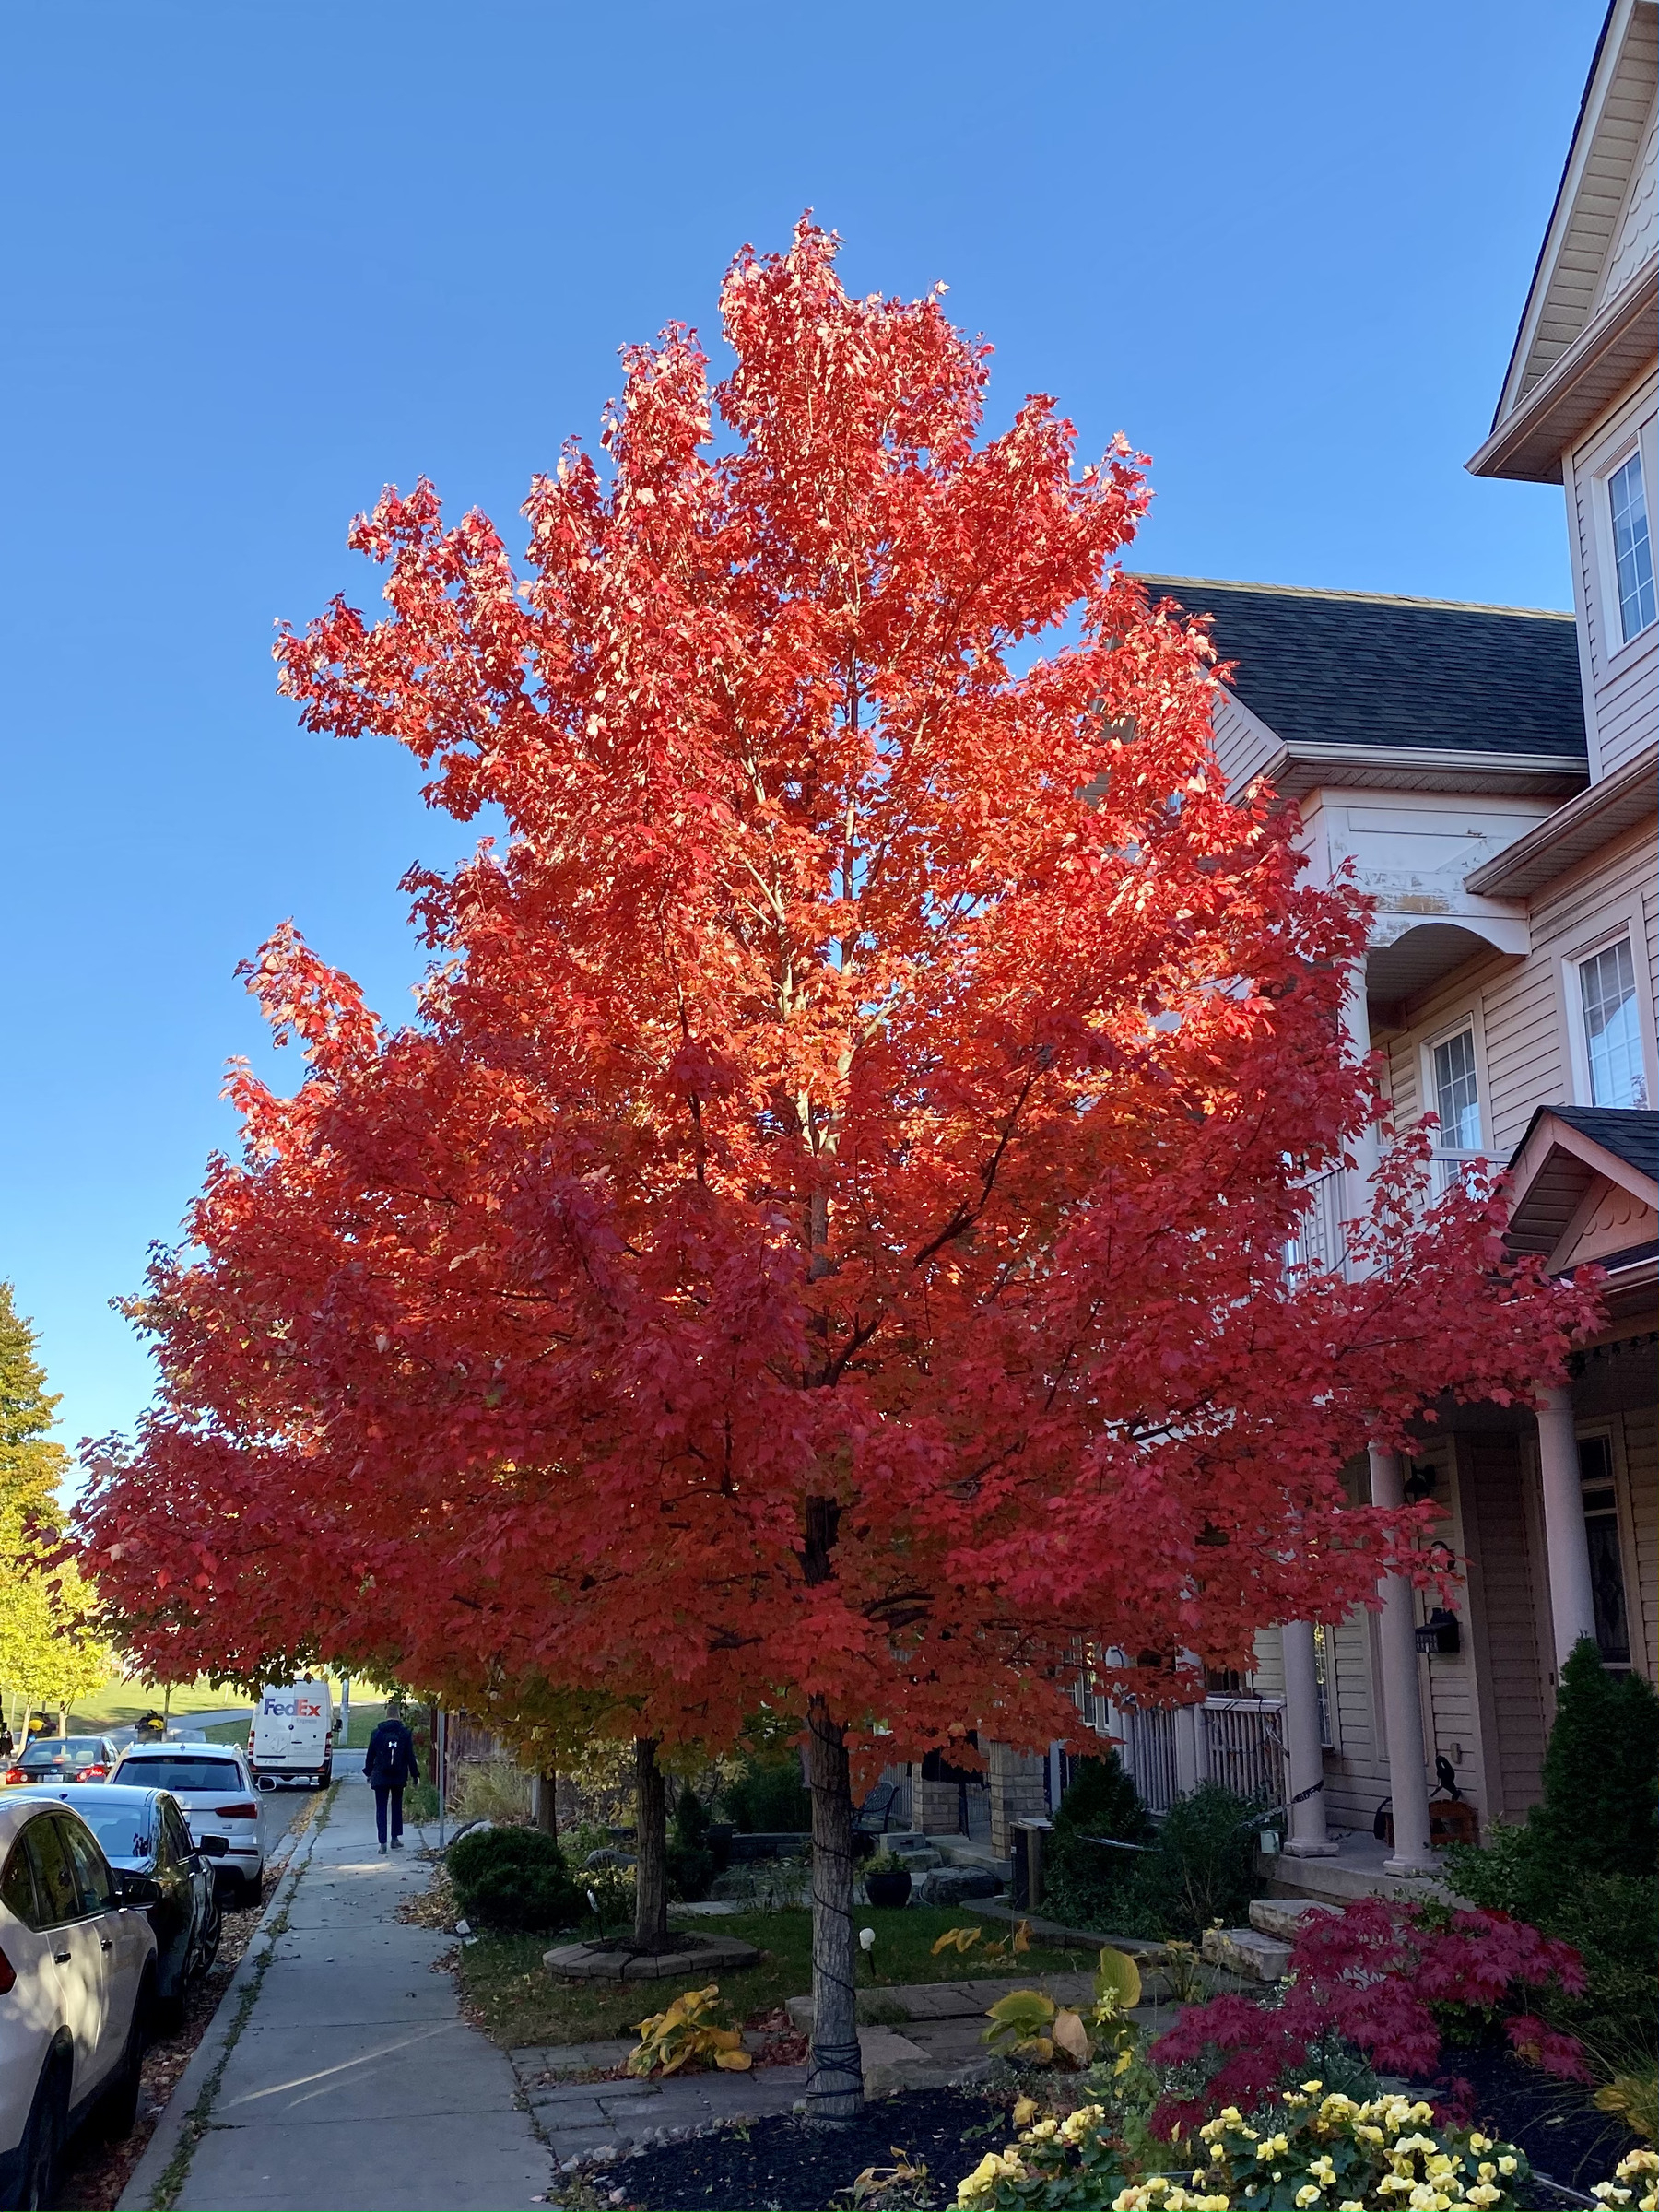 A tree with bright red leaves on a residential street